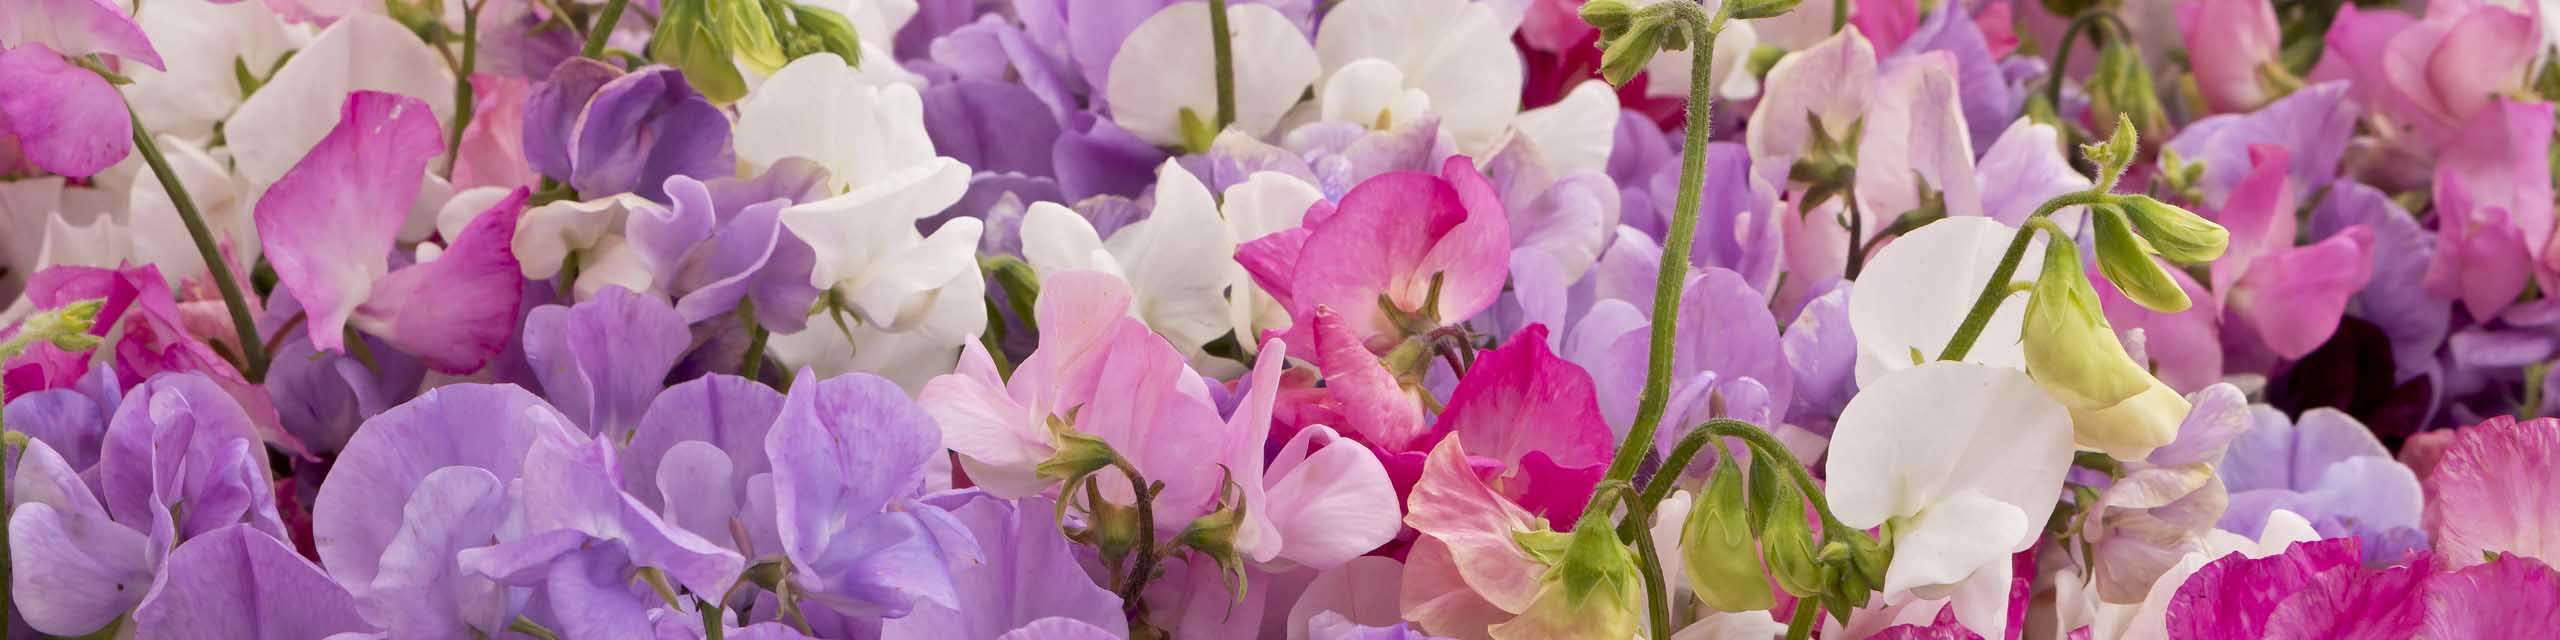 Close up of pastel colored sweet pea flowers.